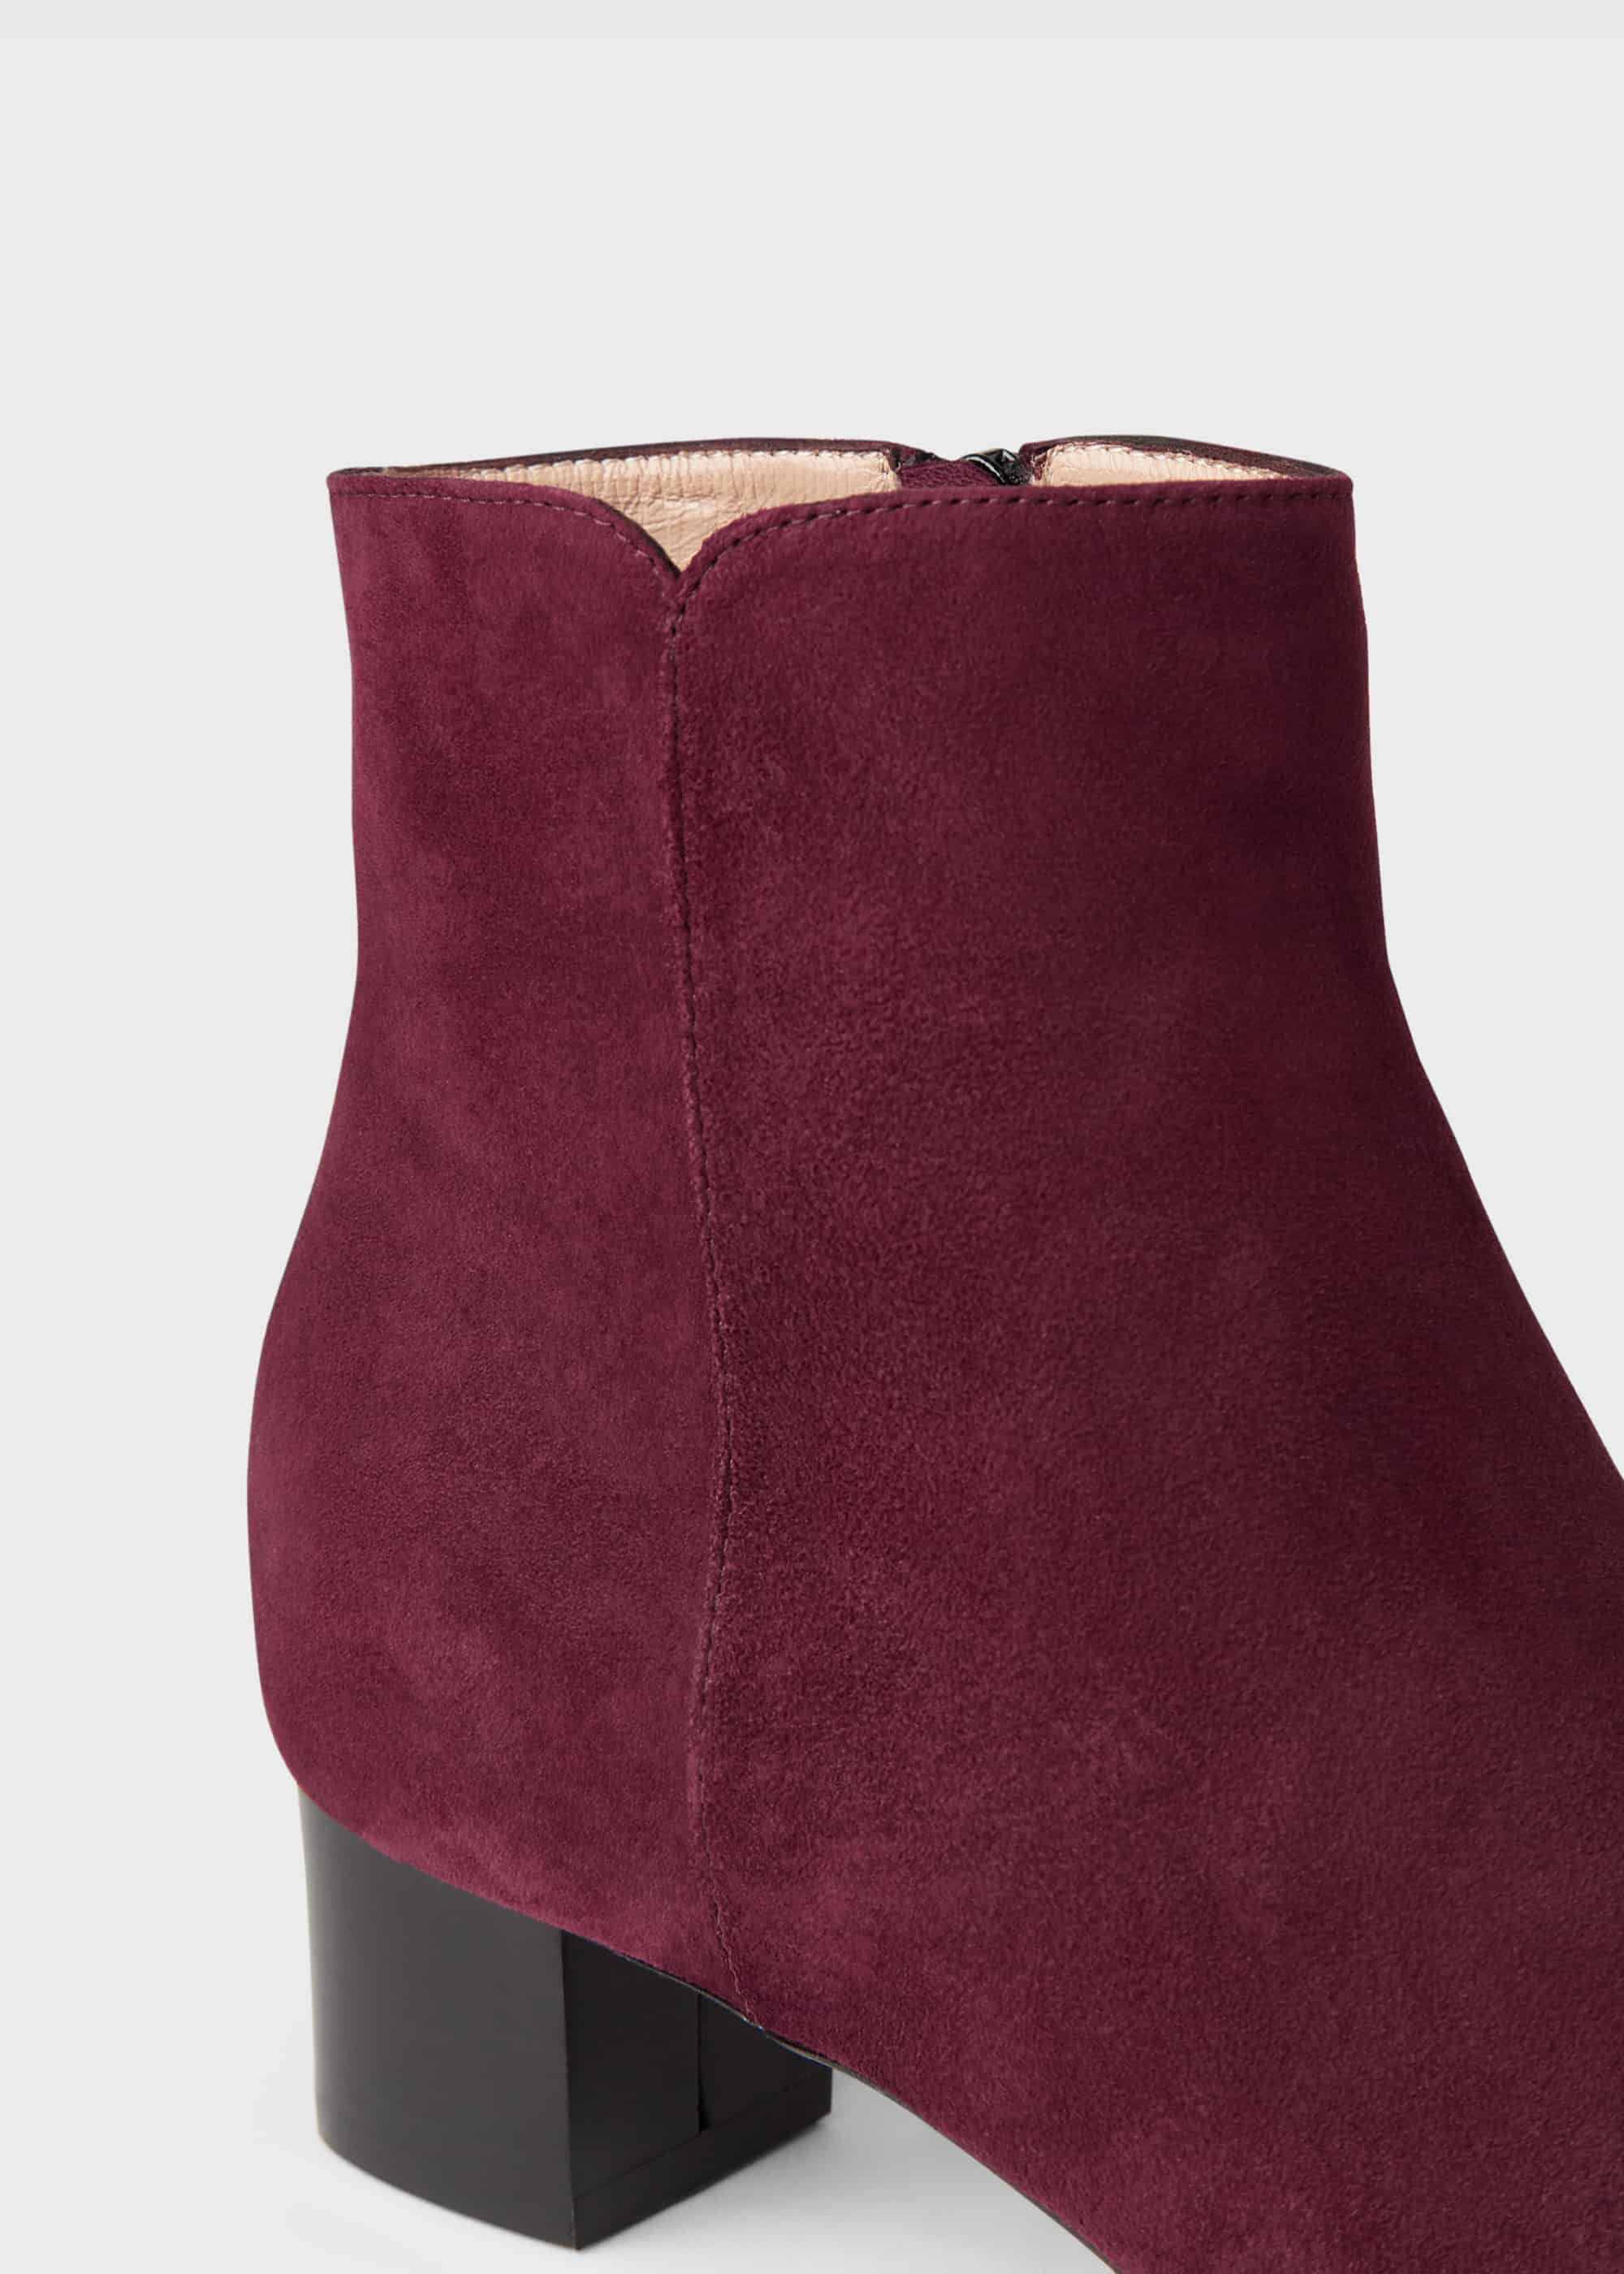 sadie ankle boots in suede